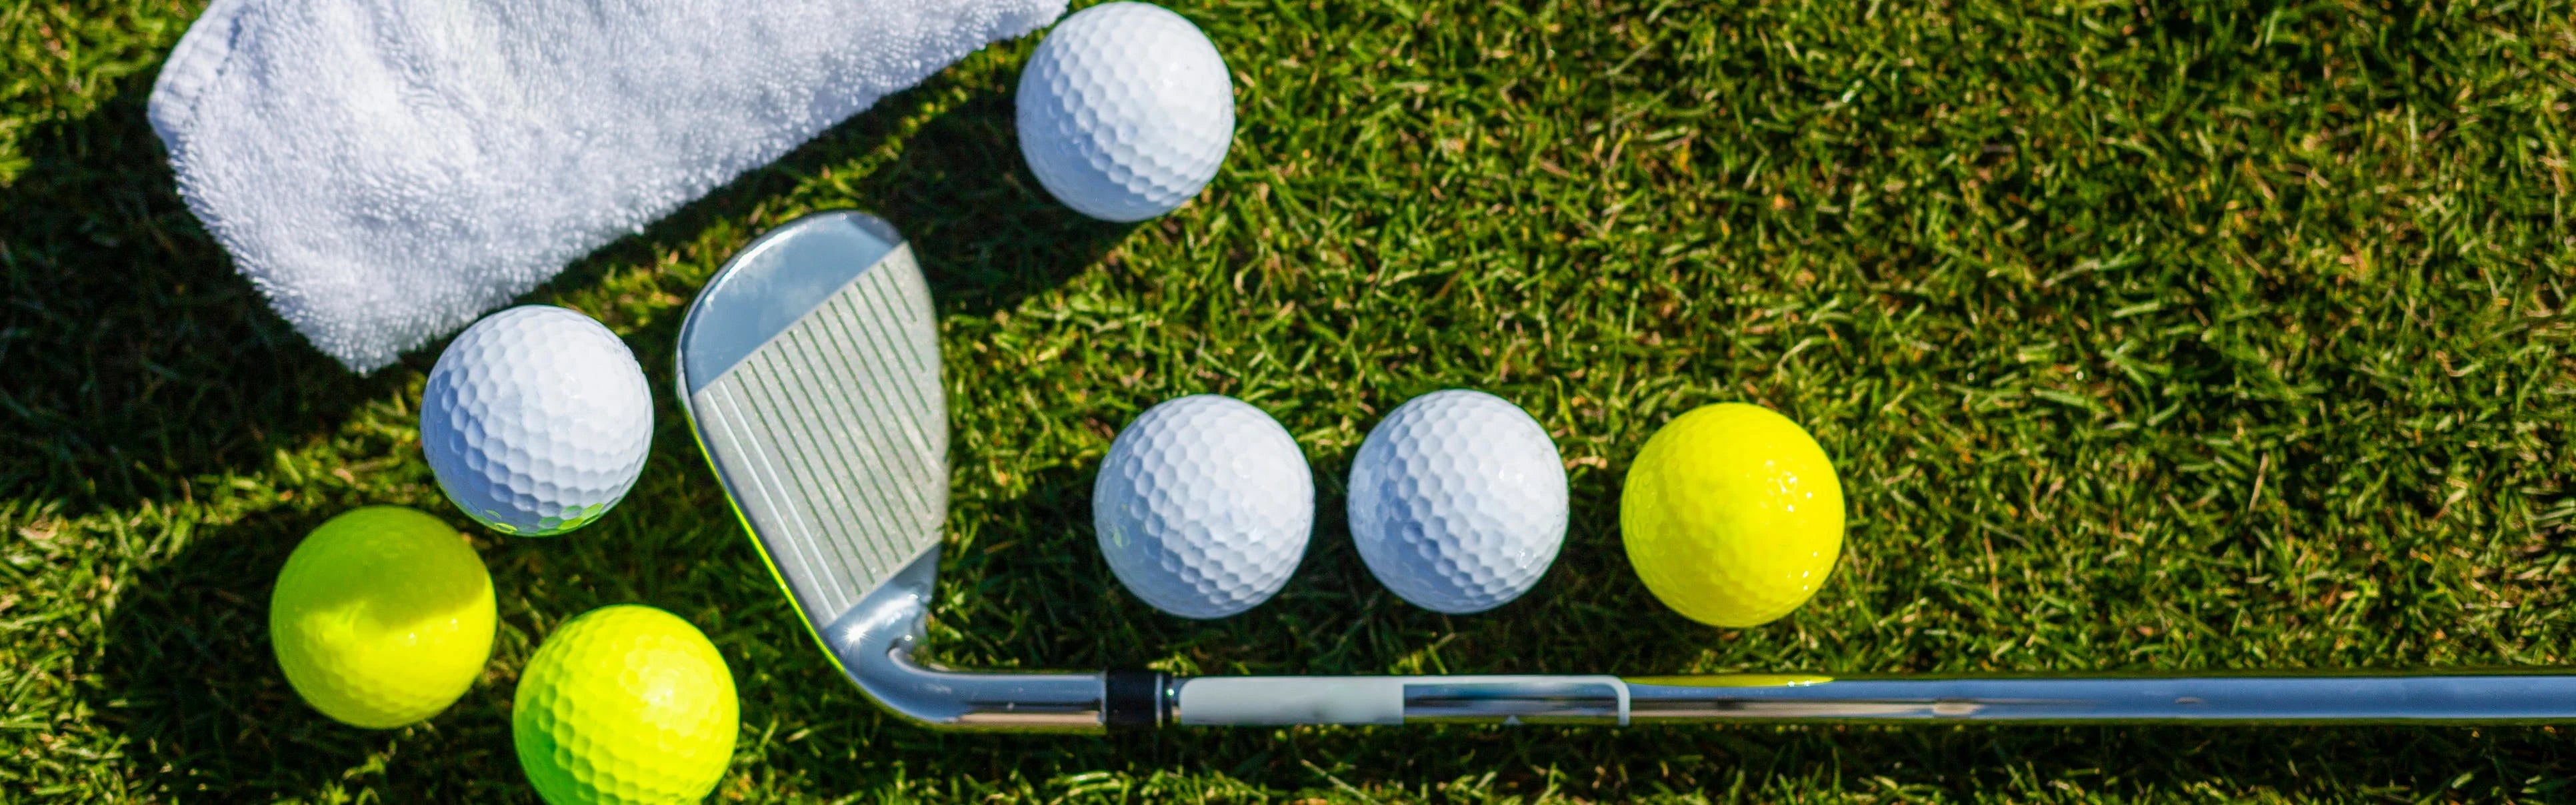 write a blog about The Importance of Proper Shaft Flex for Your Irons: Finding the Right Fit